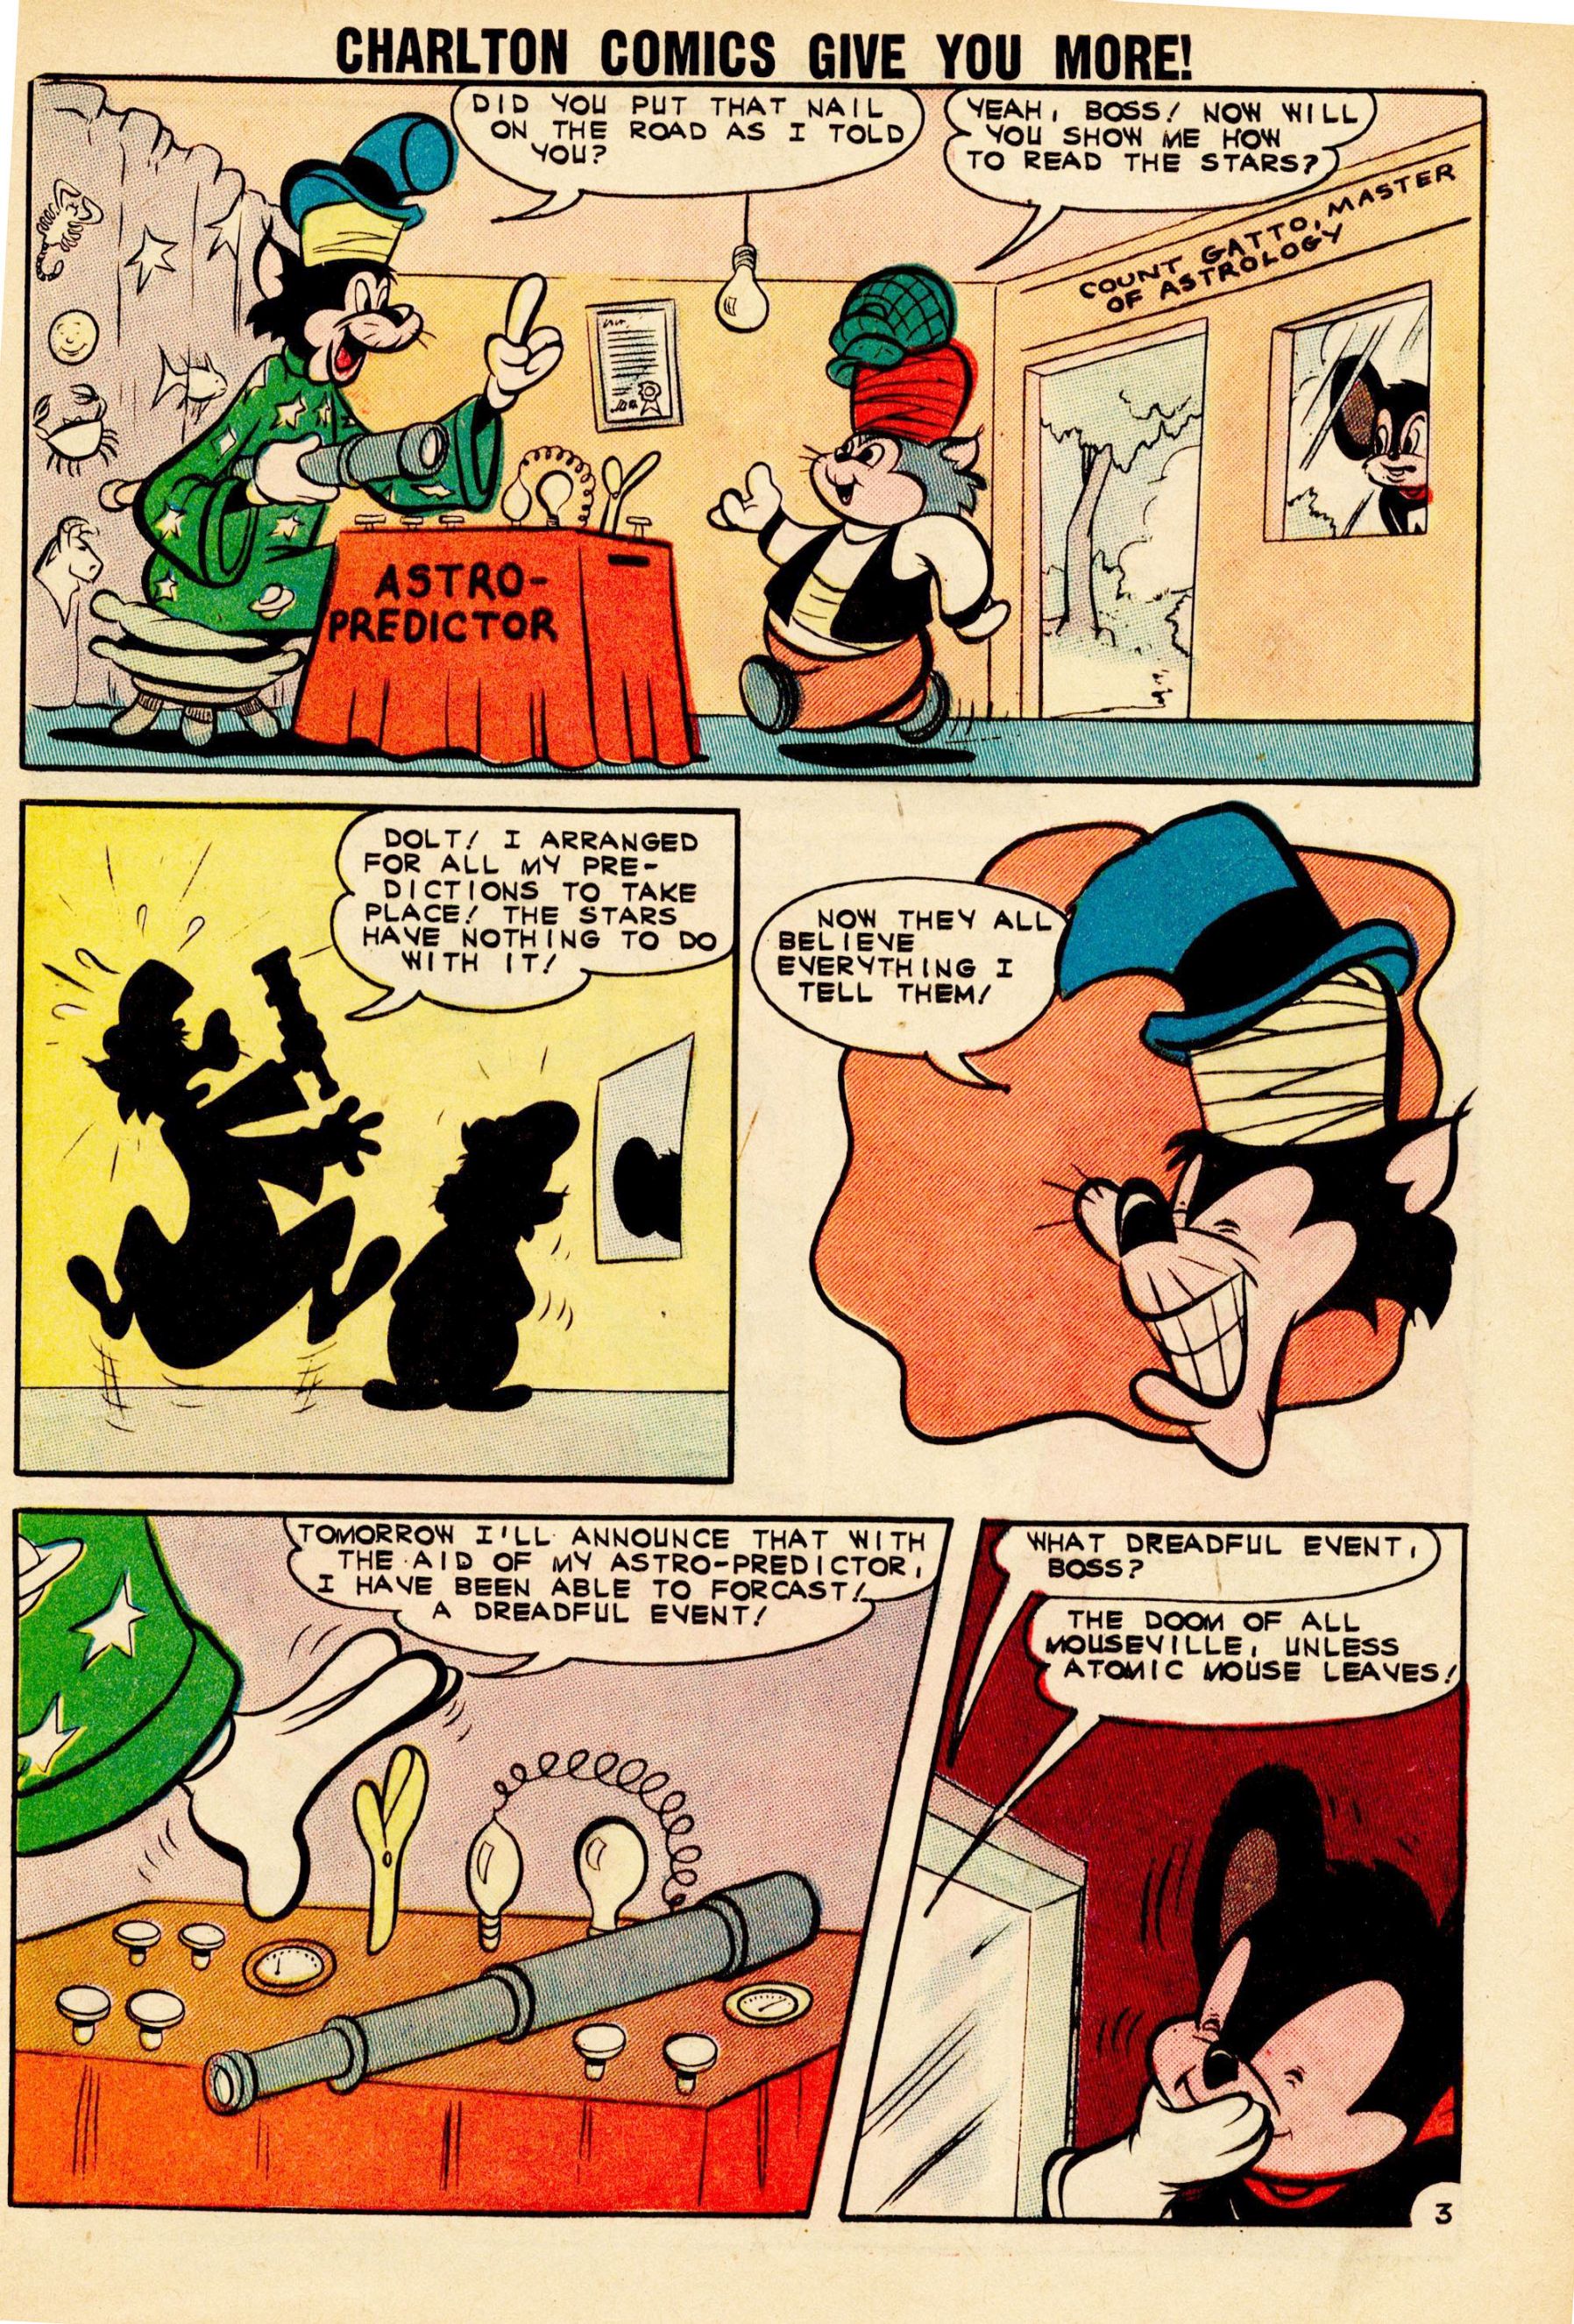 Read online Atomic Mouse comic -  Issue #46 - 29